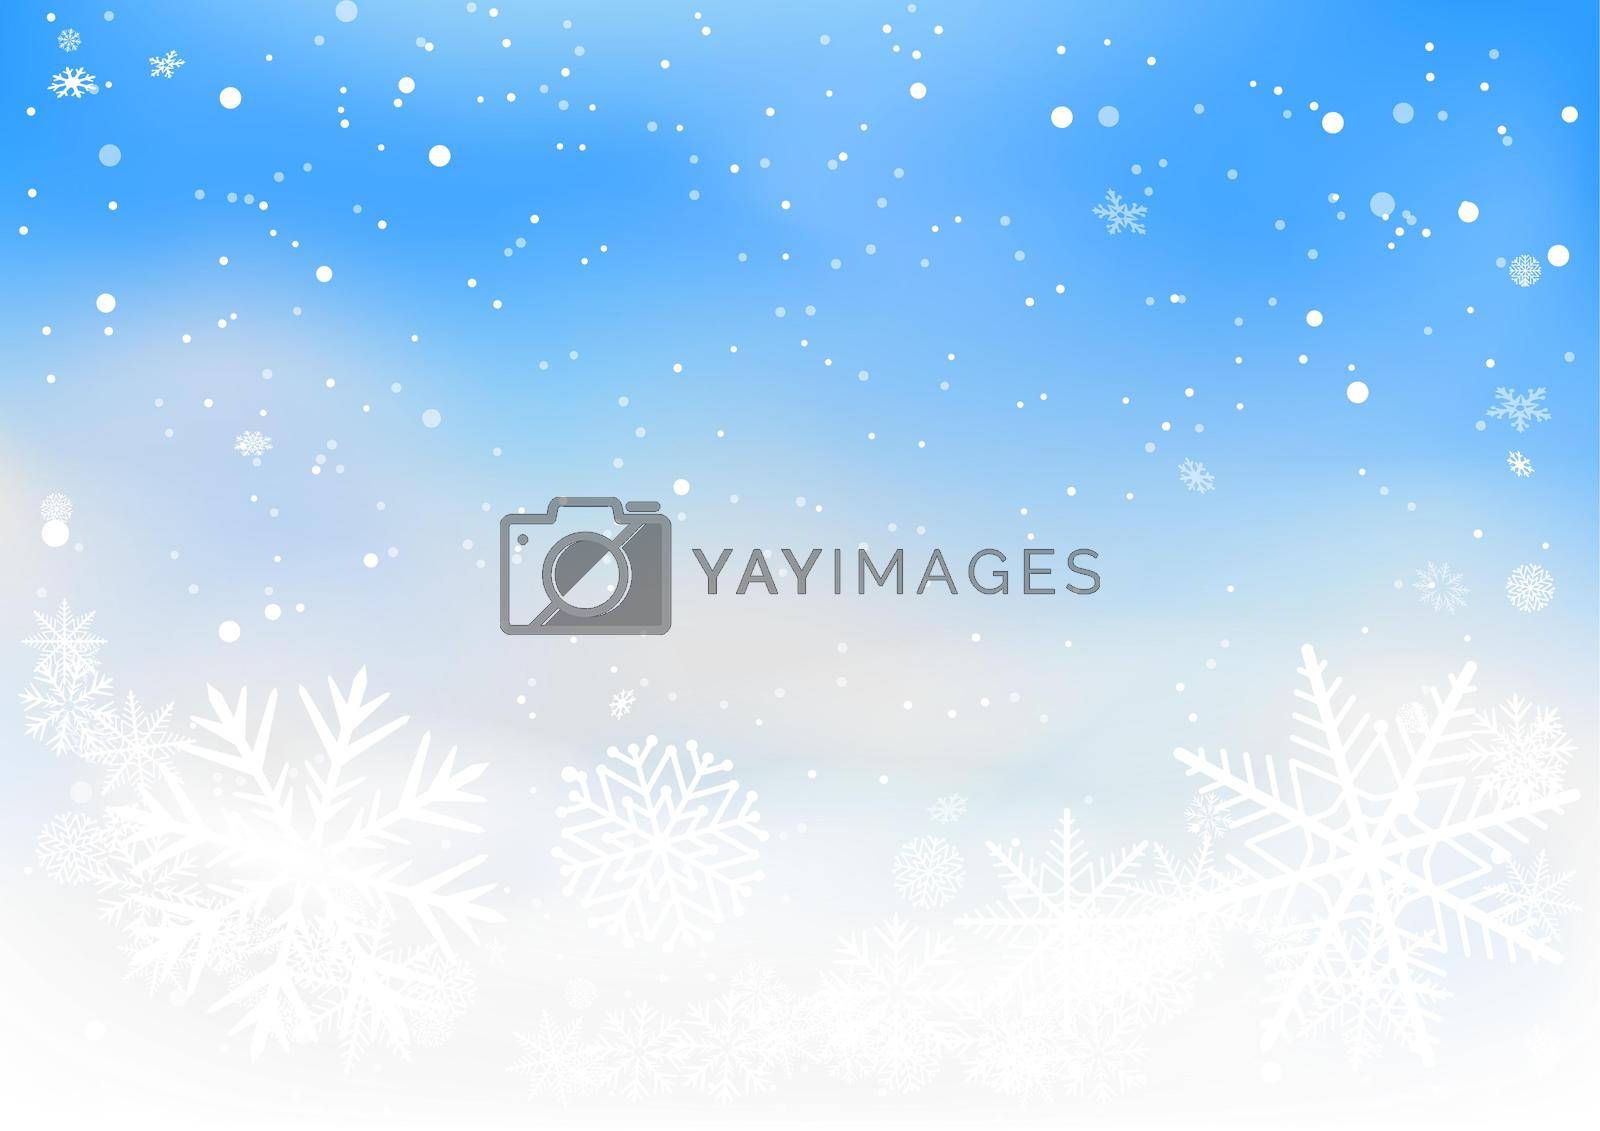 Christmas clouds sky and snowfall winter background. Holiday cartoon background snow falling. Seasonal decoration template